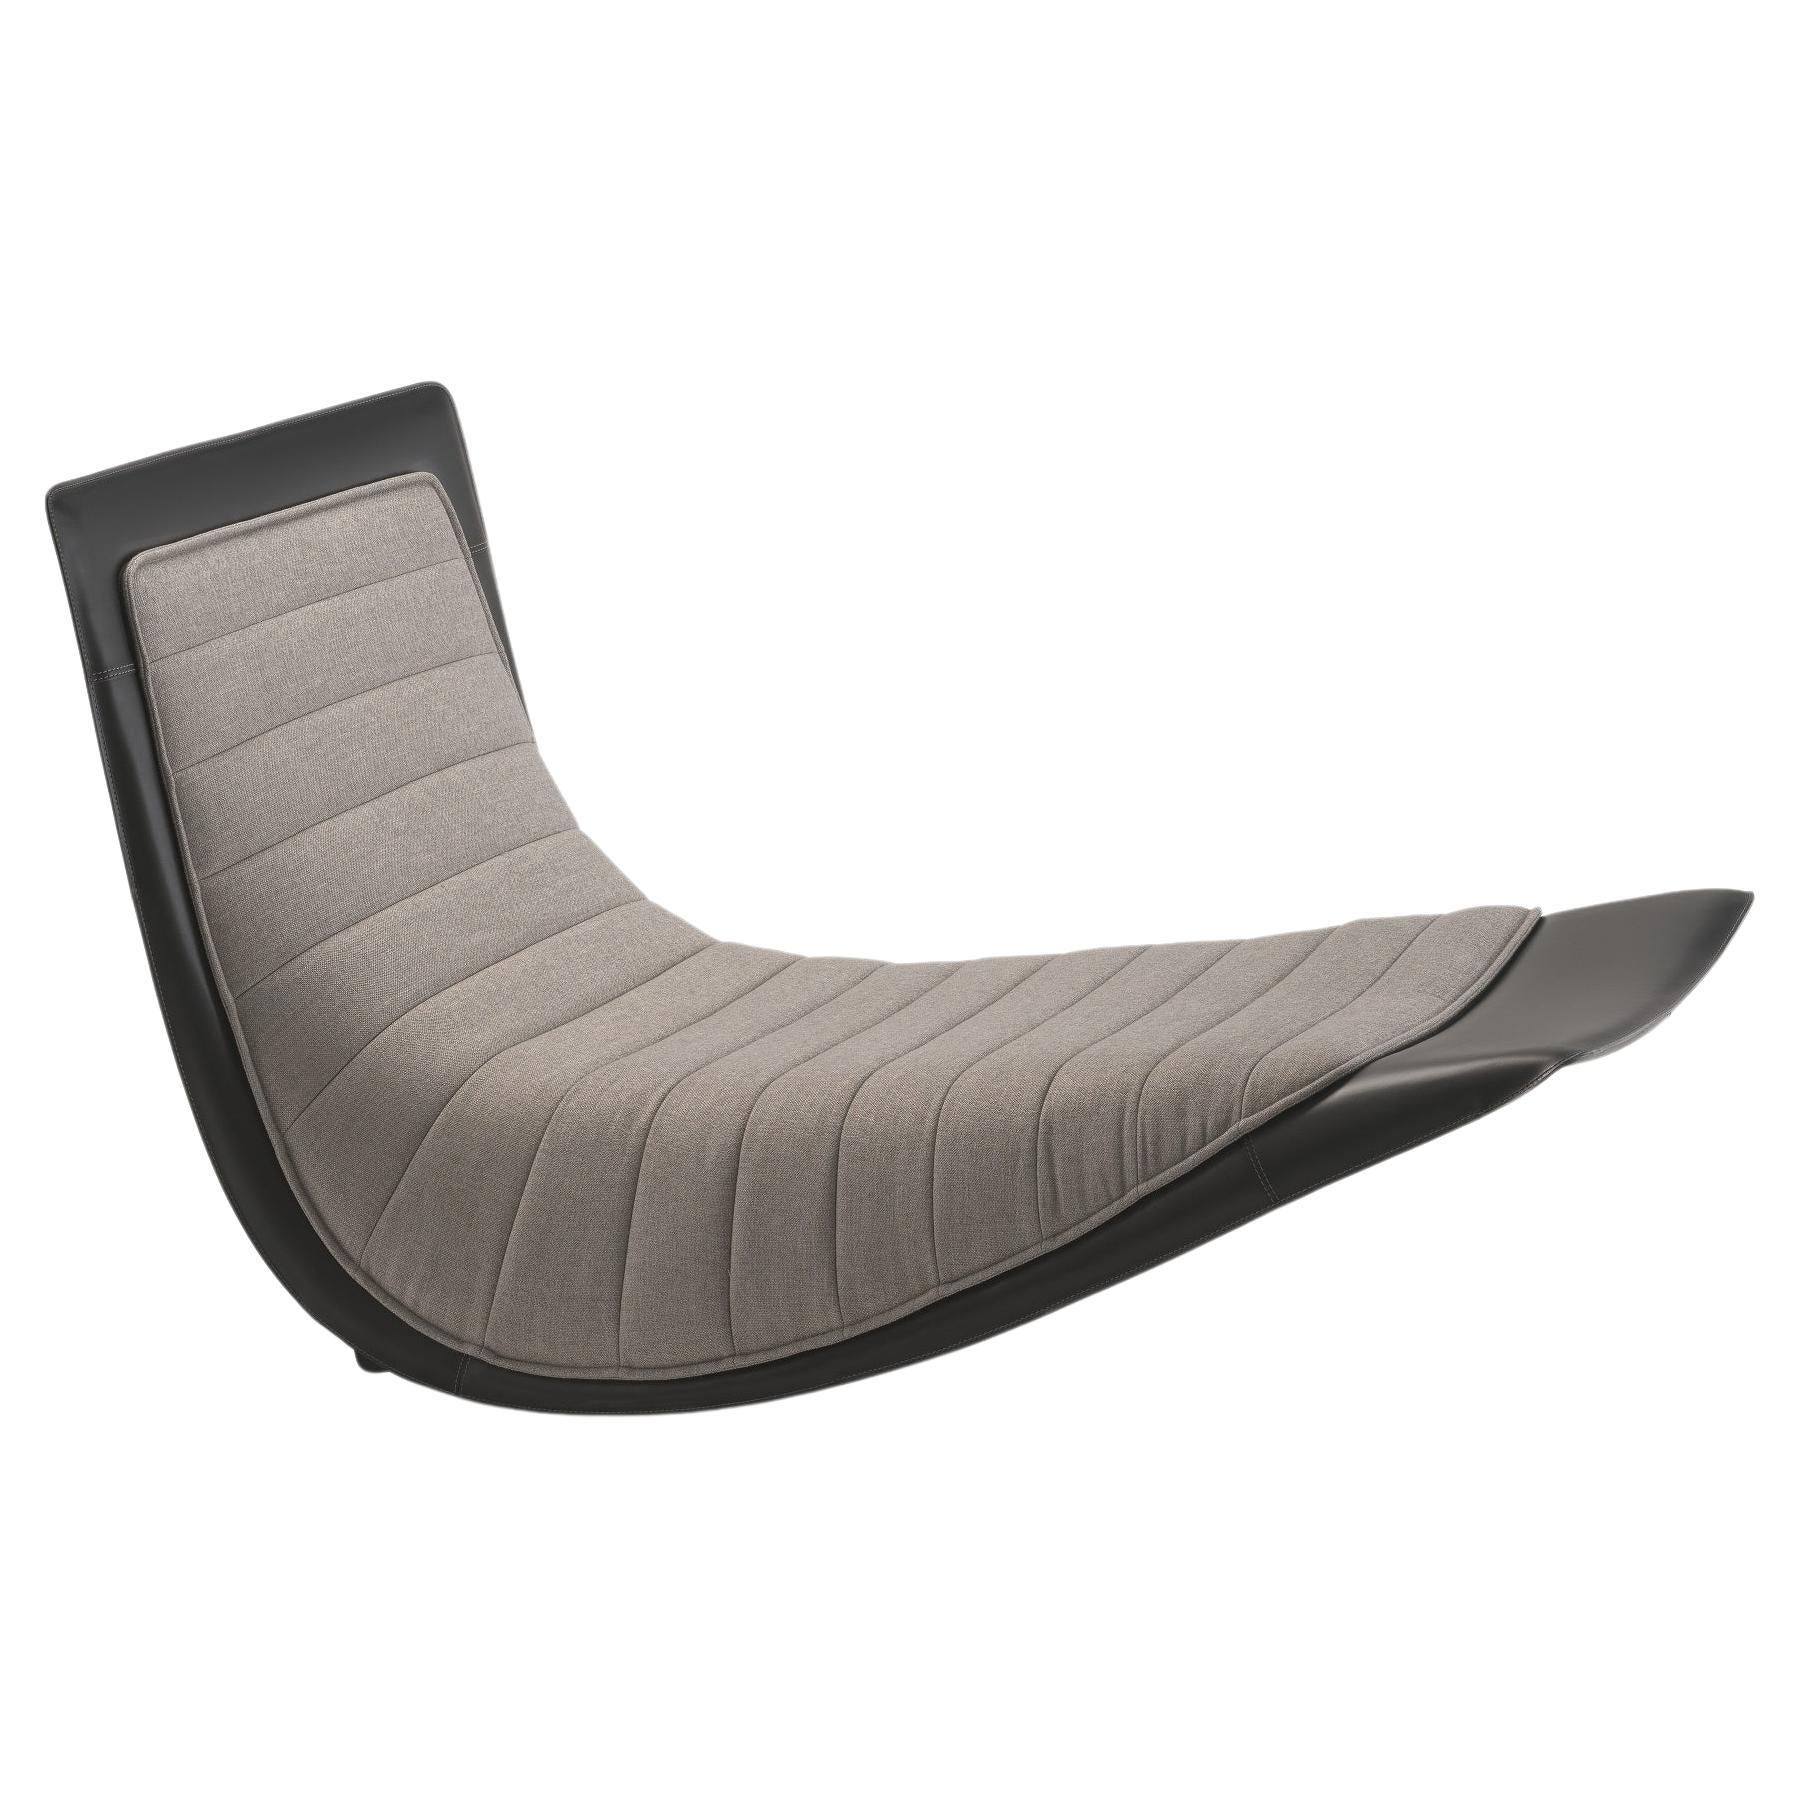 Zanotta Rider Tilting Chaise Longue in Grey Fabric by Ludovica+Roberto Palomba For Sale